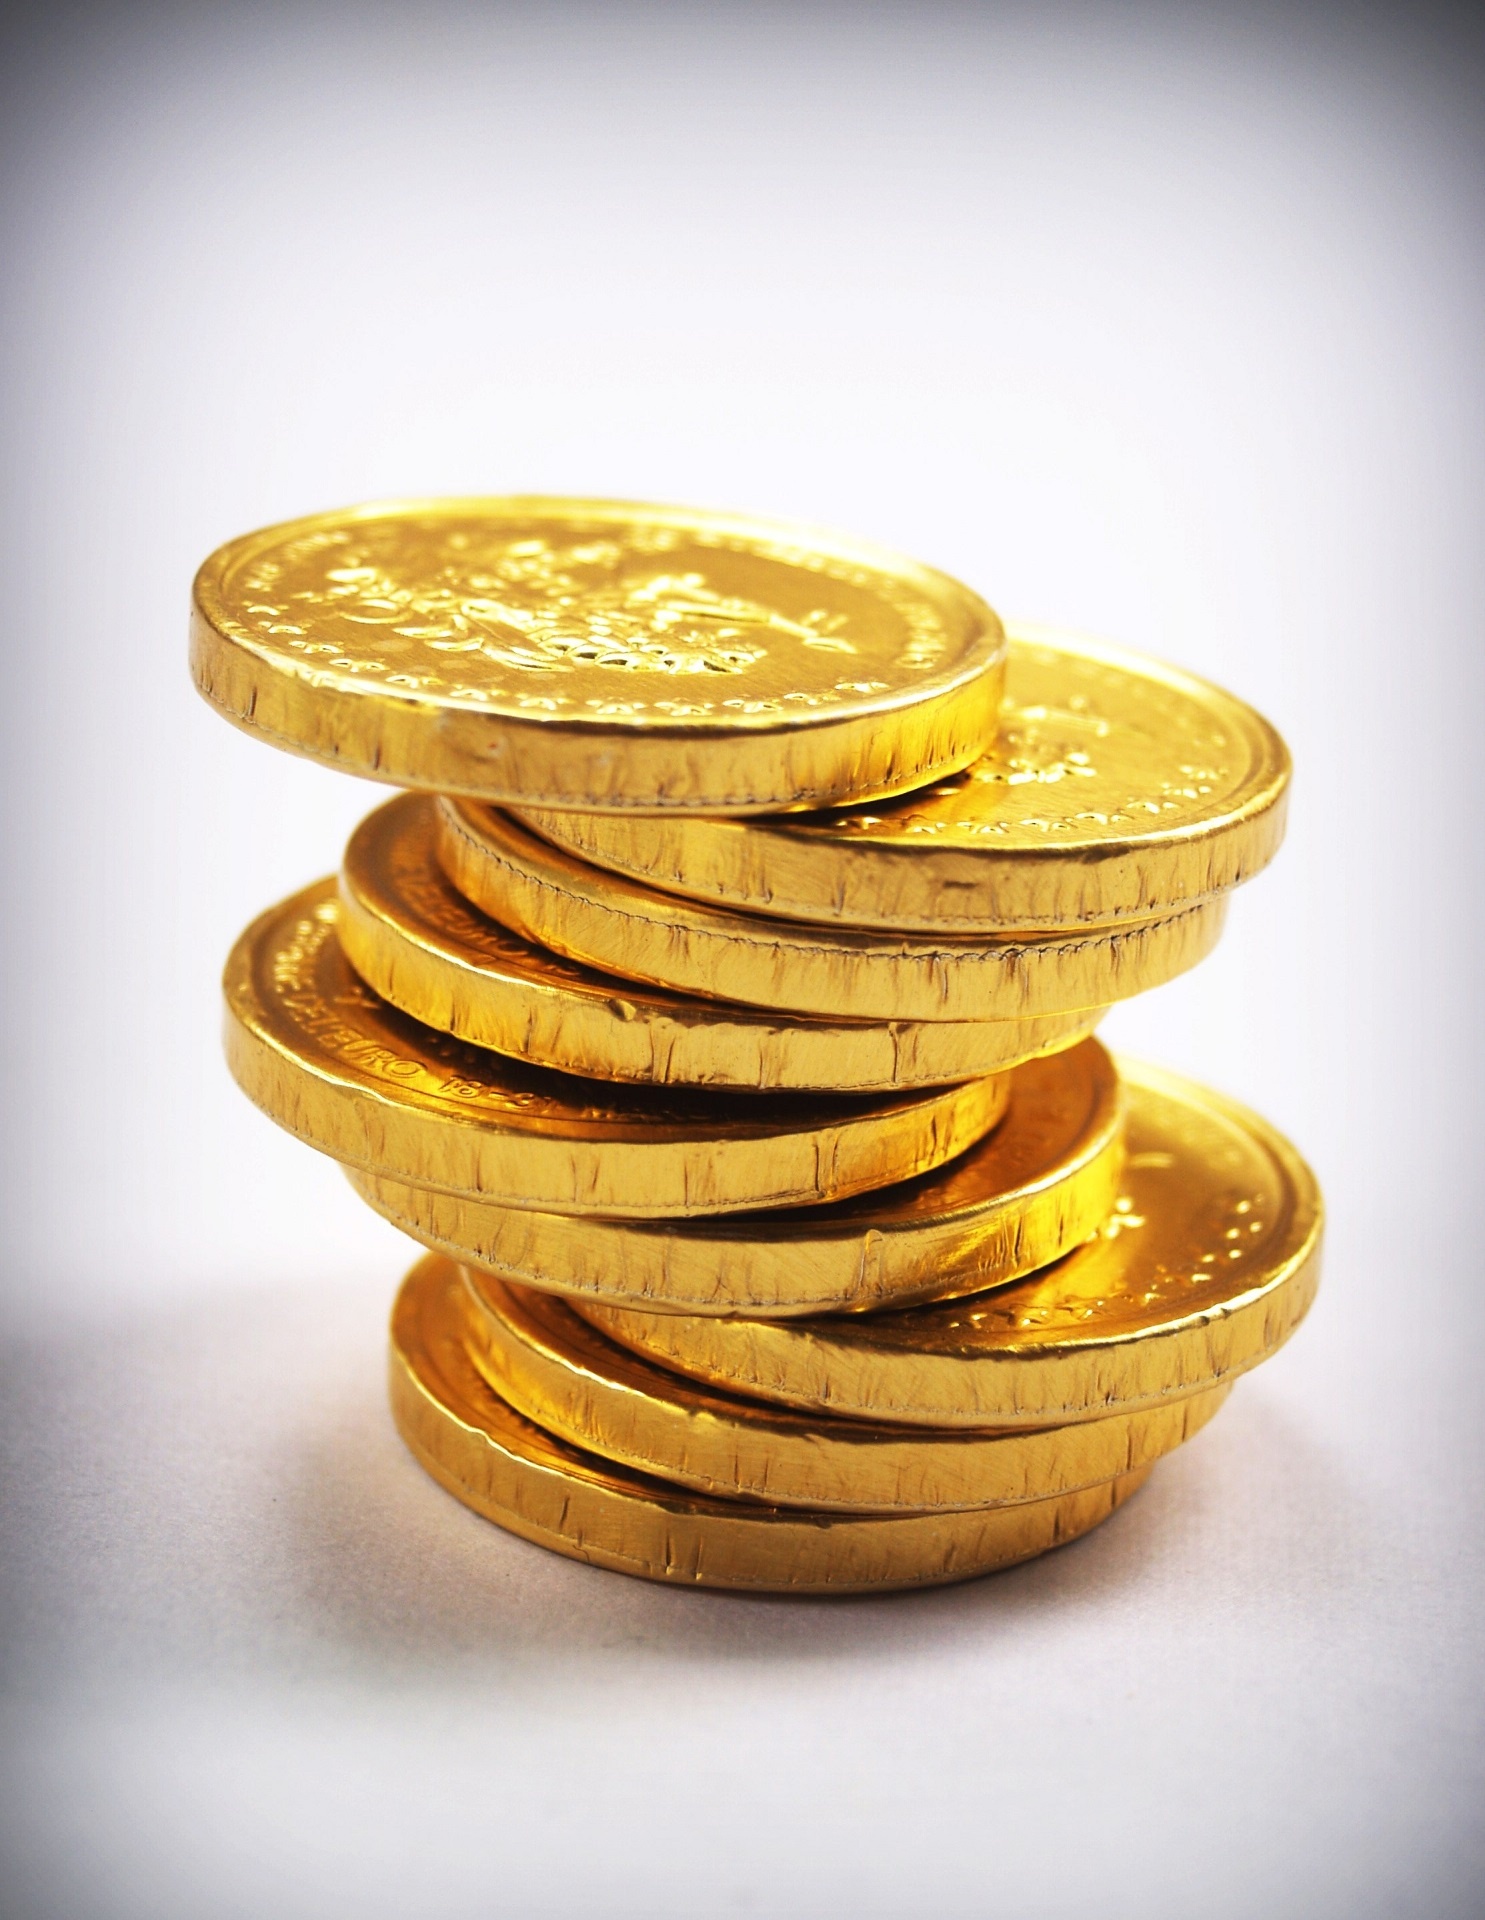 gold coins stack free photo